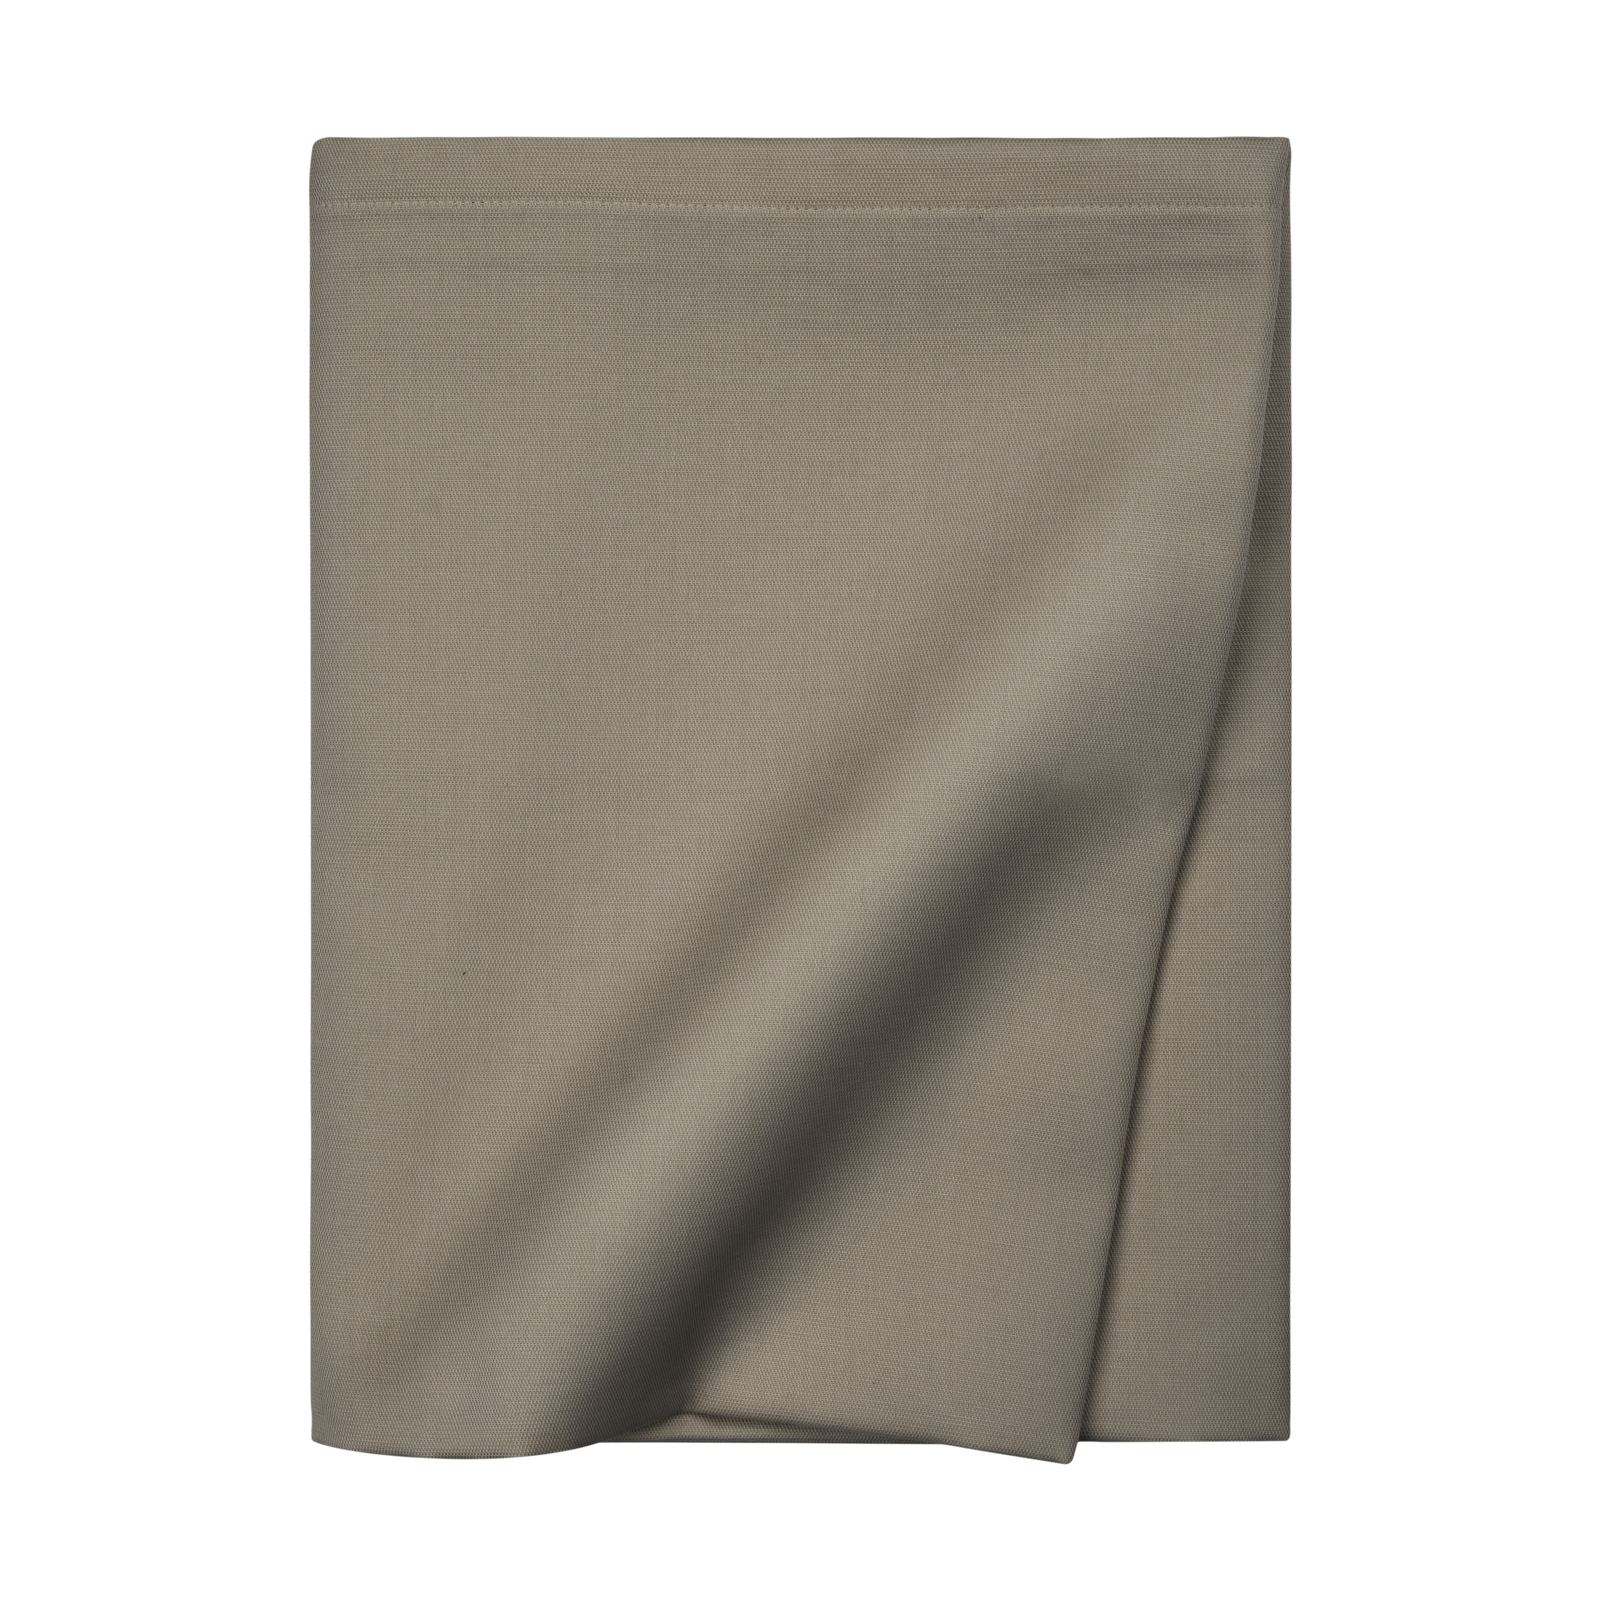 Größe: 90x 90 cm Farbe: taupe #farbe_taupe